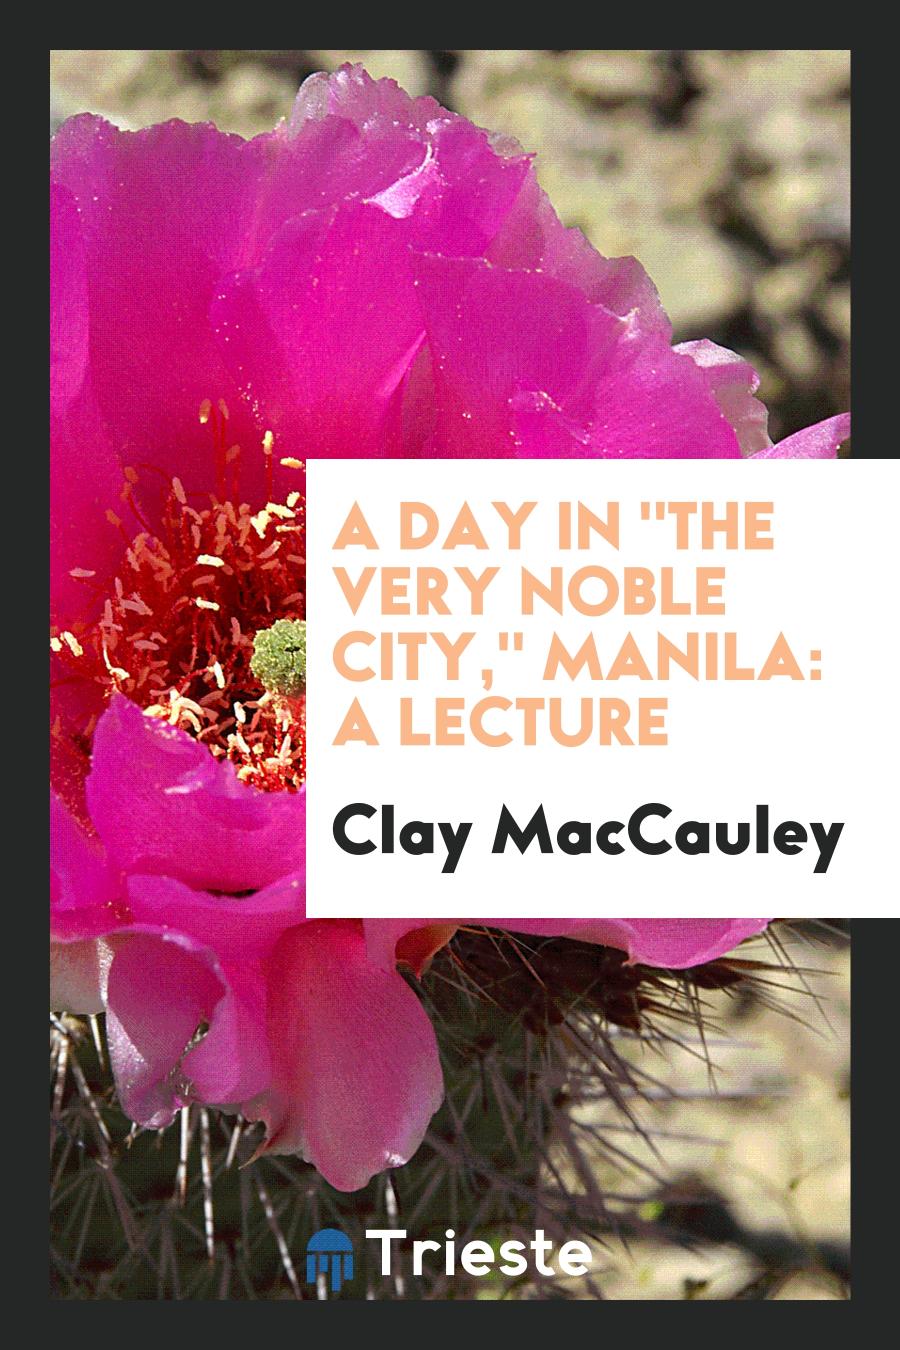 A Day in "the Very Noble City," Manila: A Lecture